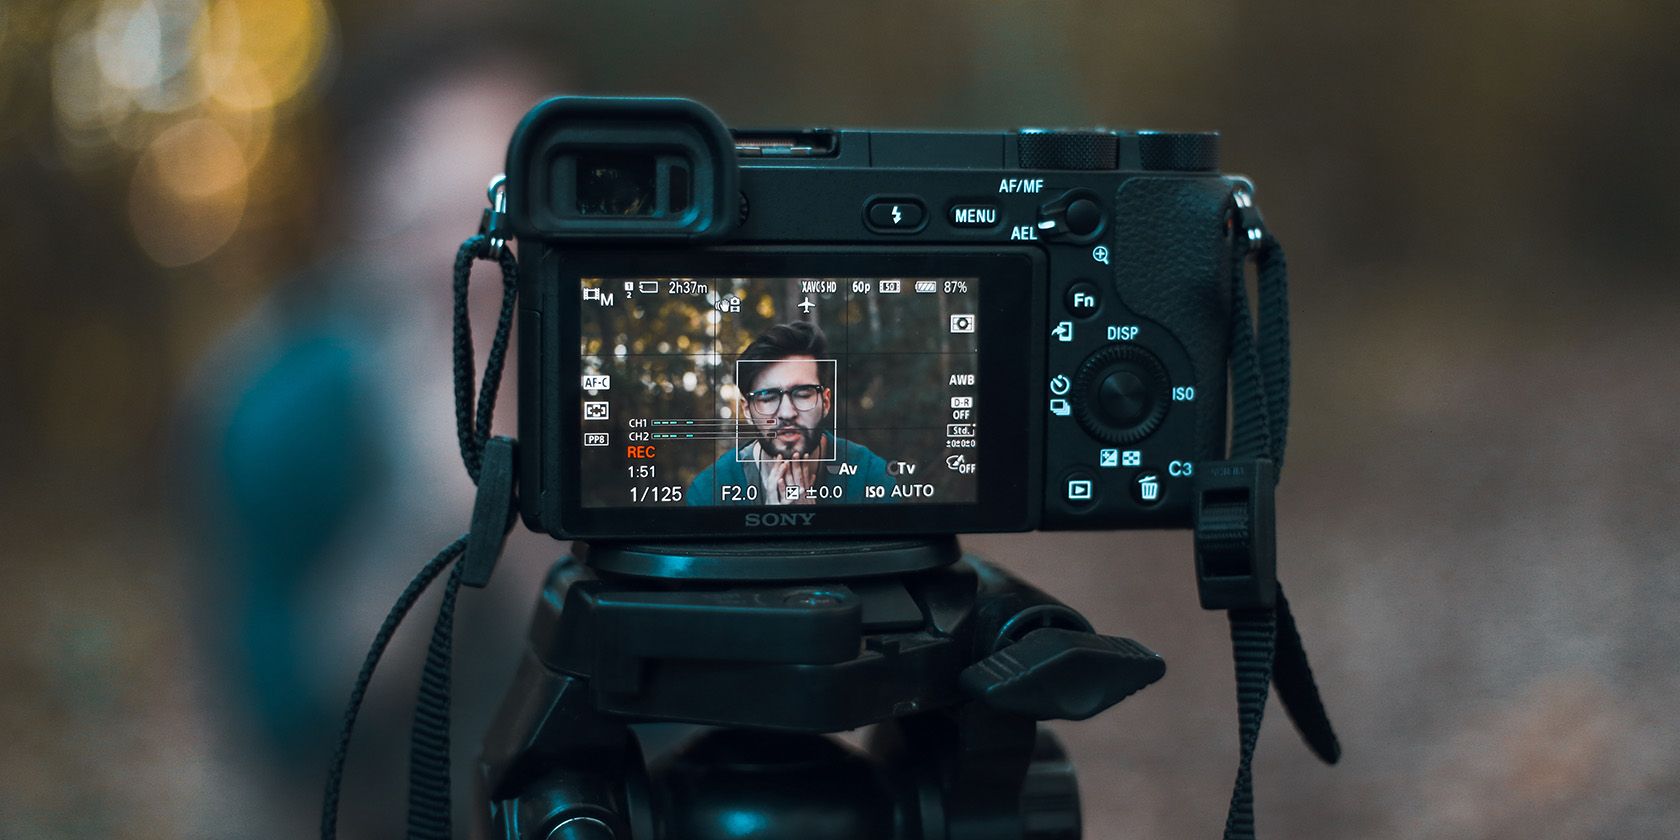 7 Video Quality Enhancers to Improve Low Resolution on Your Videos